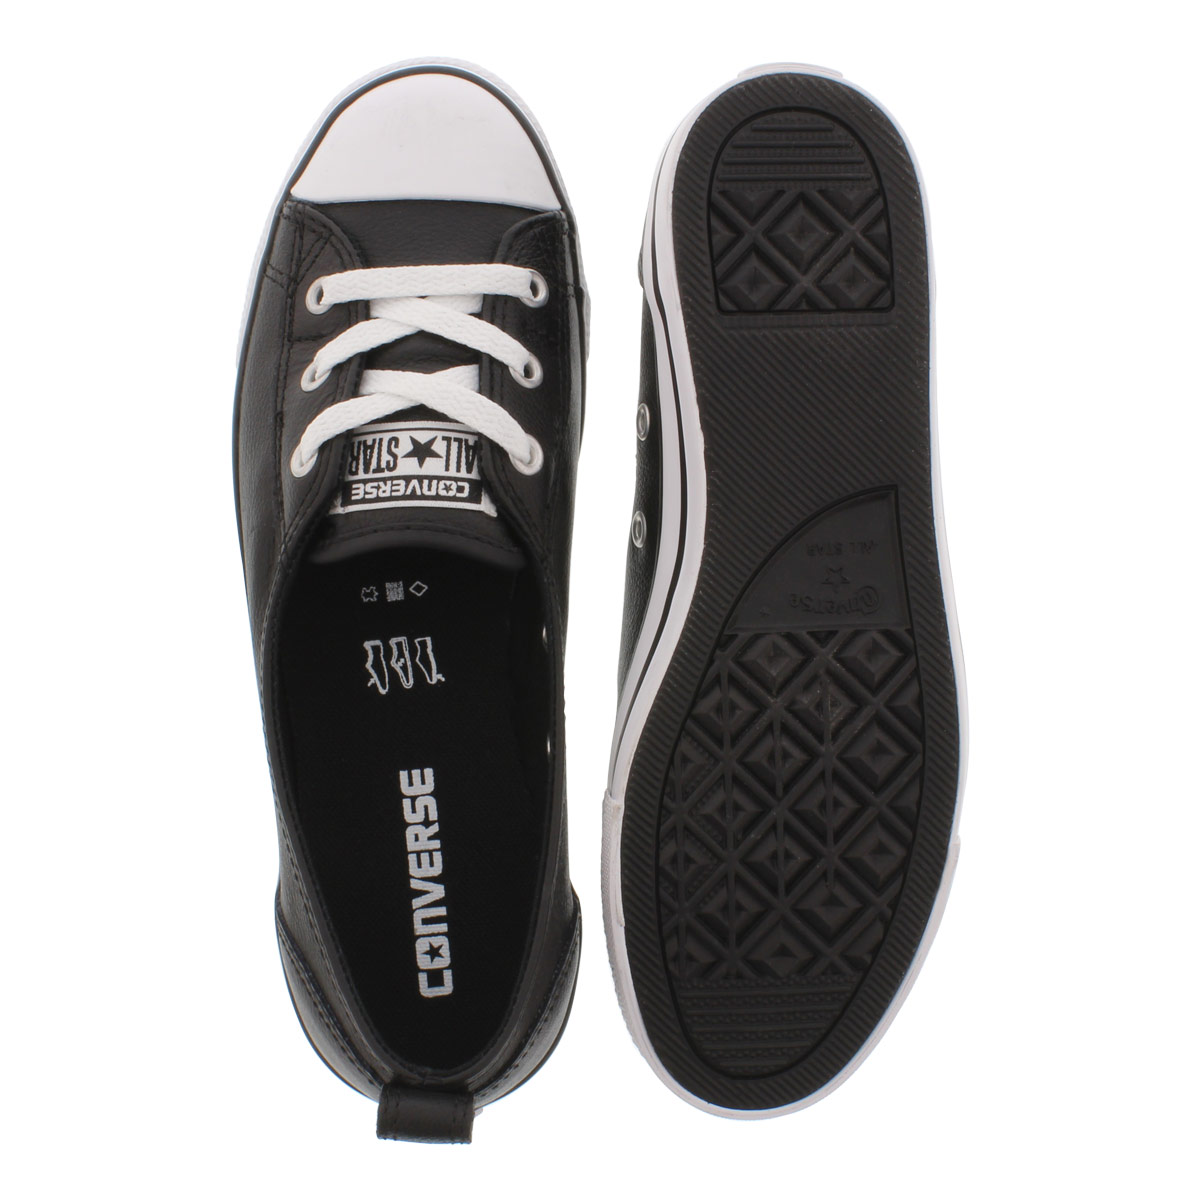 converse all star ballet lace leather